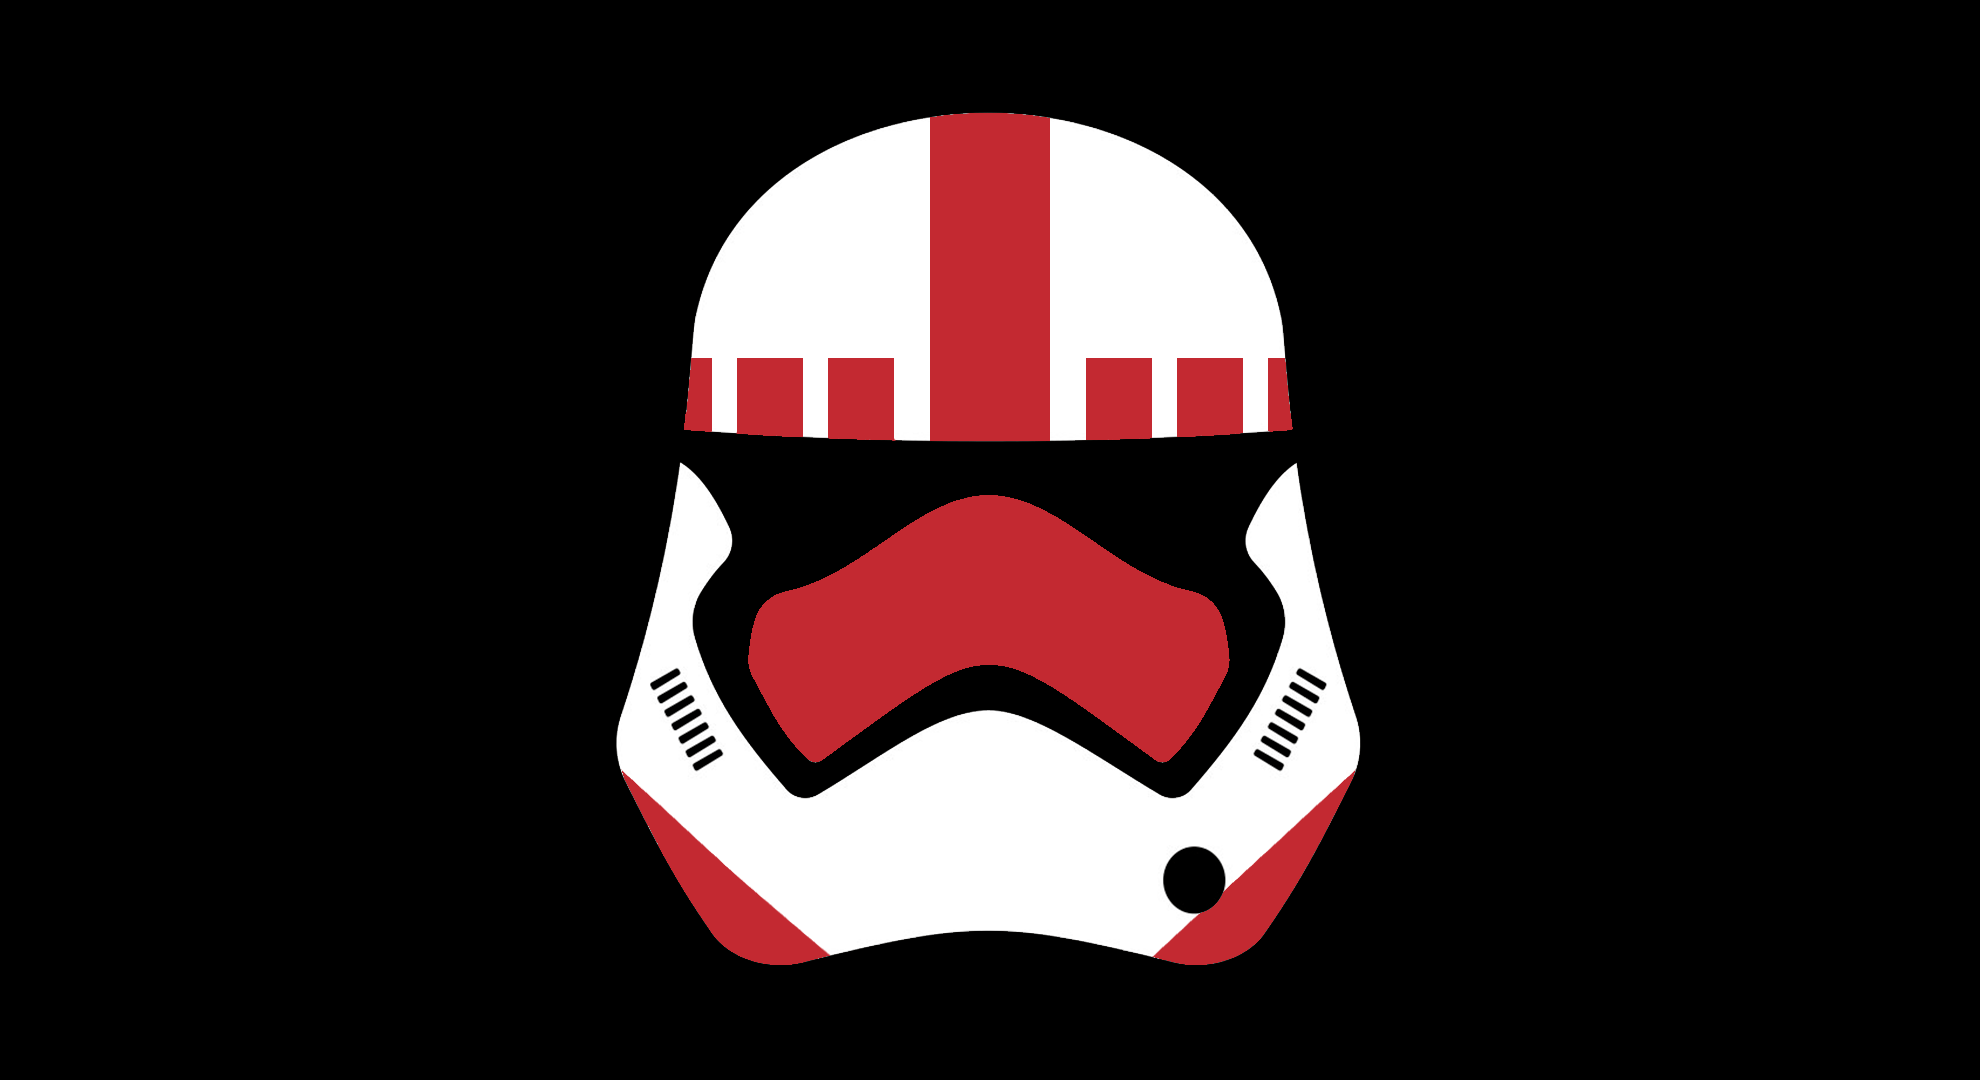 Did a quick photohop of how the First Order helmet would look